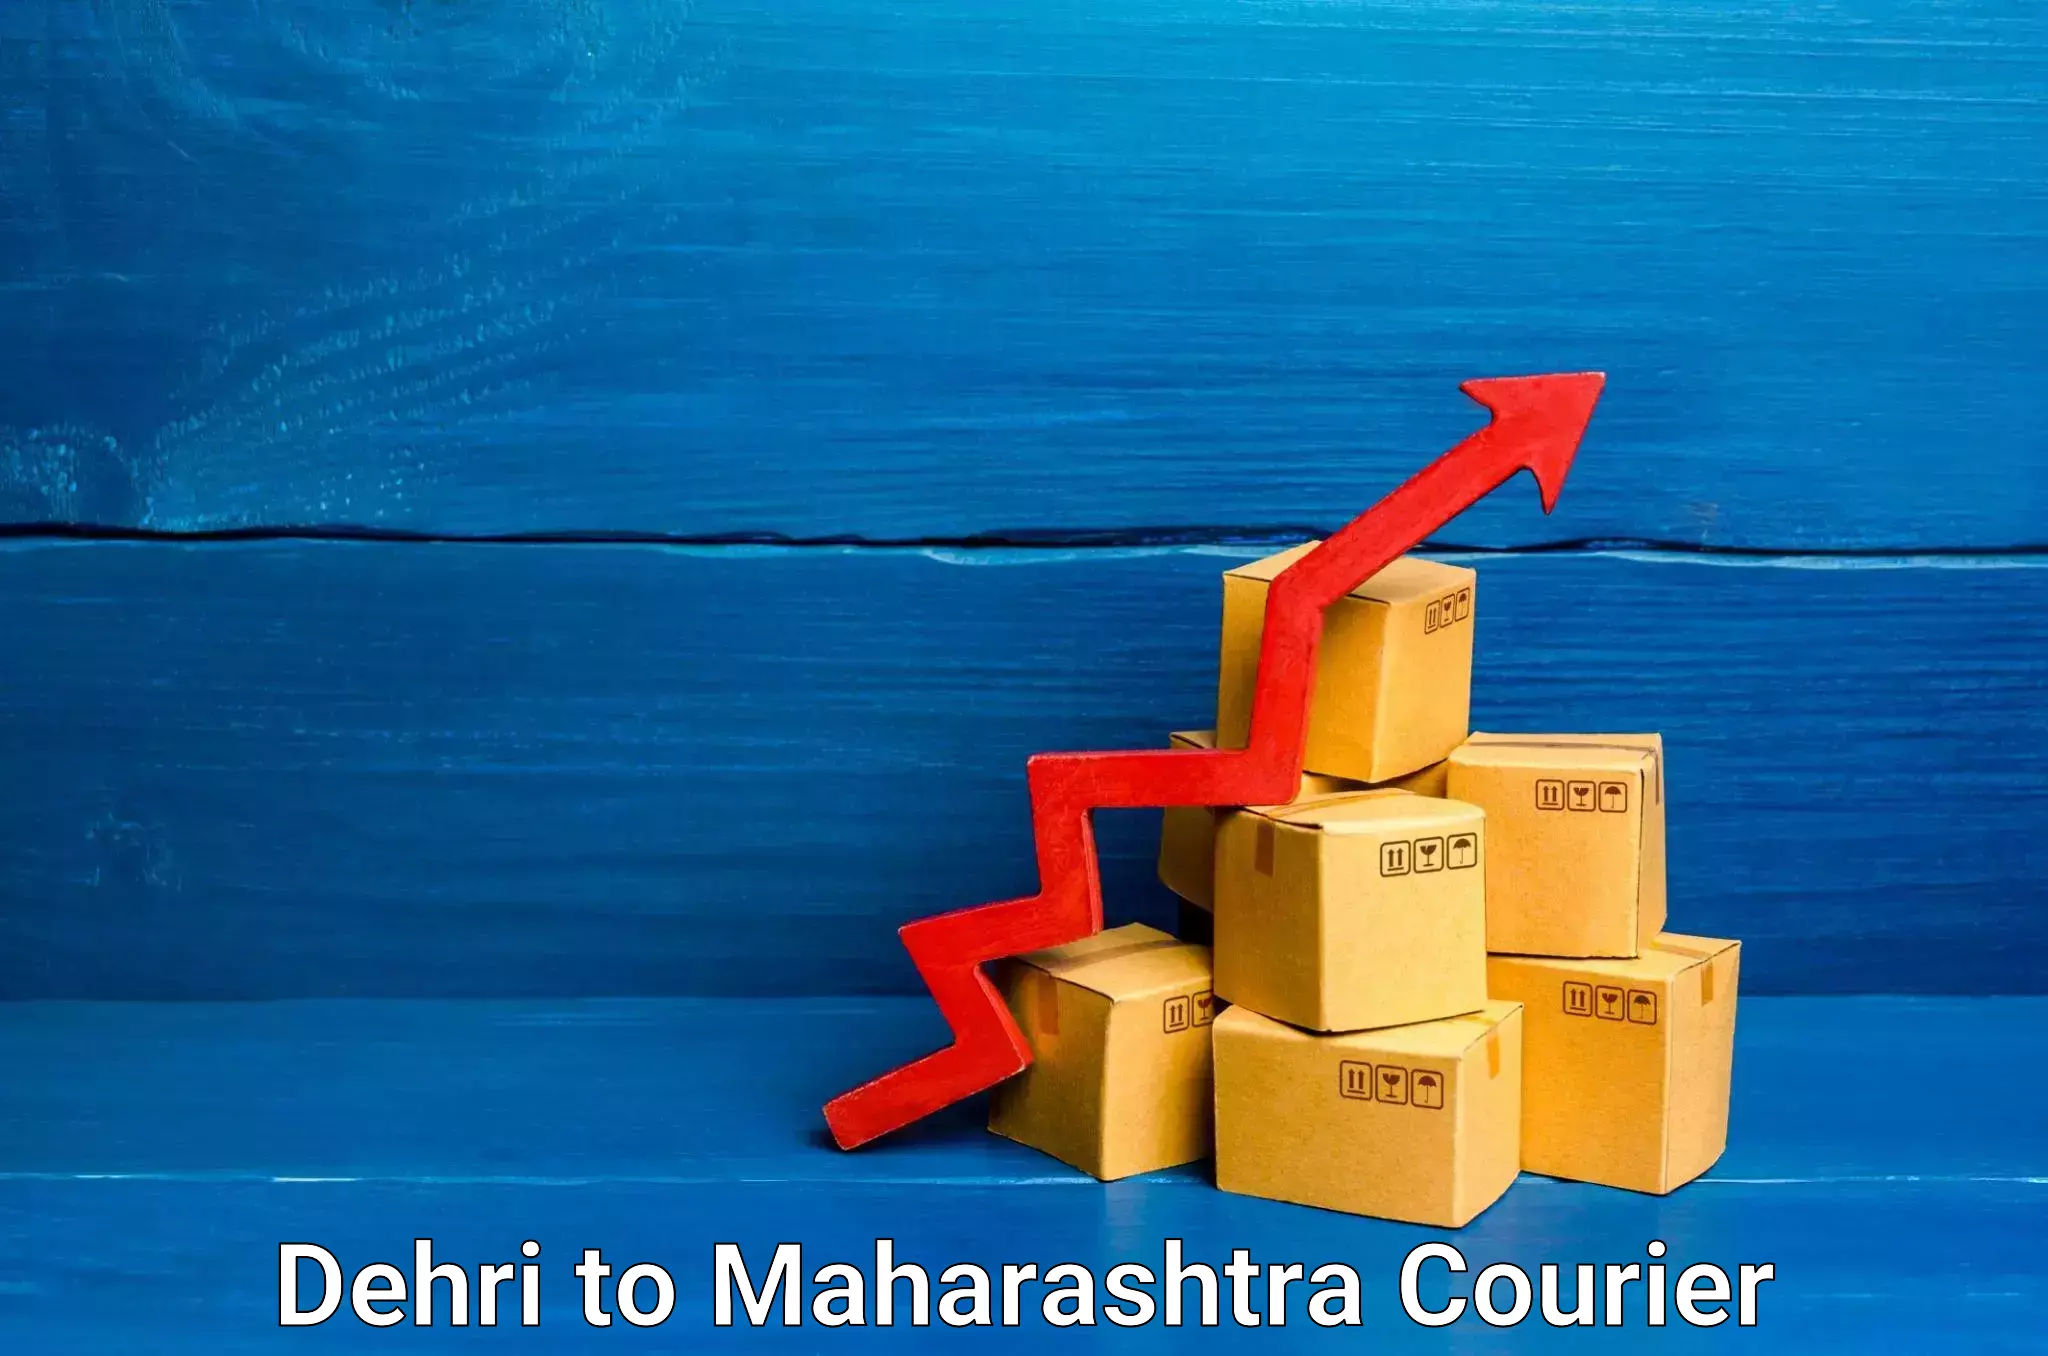 Professional movers and packers Dehri to Maharashtra